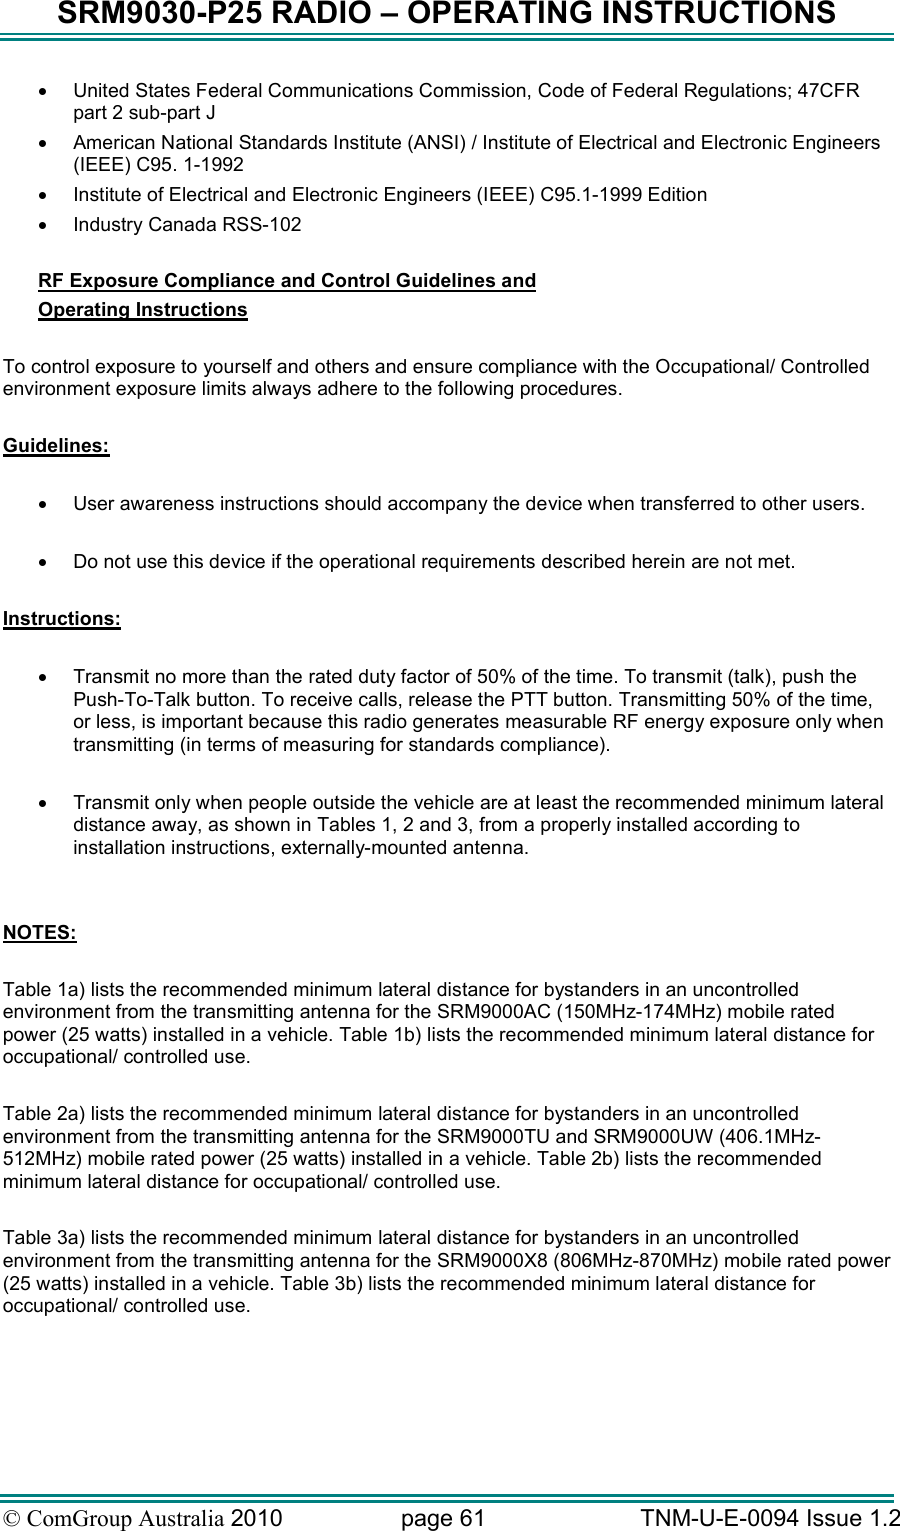 SRM9030-P25 RADIO – OPERATING INSTRUCTIONS © ComGroup Australia 2010  page 61   TNM-U-E-0094 Issue 1.2 •  United States Federal Communications Commission, Code of Federal Regulations; 47CFR part 2 sub-part J •  American National Standards Institute (ANSI) / Institute of Electrical and Electronic Engineers (IEEE) C95. 1-1992 •  Institute of Electrical and Electronic Engineers (IEEE) C95.1-1999 Edition •  Industry Canada RSS-102  RF Exposure Compliance and Control Guidelines and  Operating Instructions  To control exposure to yourself and others and ensure compliance with the Occupational/ Controlled environment exposure limits always adhere to the following procedures.  Guidelines:  •  User awareness instructions should accompany the device when transferred to other users.  •  Do not use this device if the operational requirements described herein are not met.  Instructions:  •  Transmit no more than the rated duty factor of 50% of the time. To transmit (talk), push the Push-To-Talk button. To receive calls, release the PTT button. Transmitting 50% of the time, or less, is important because this radio generates measurable RF energy exposure only when transmitting (in terms of measuring for standards compliance).  •  Transmit only when people outside the vehicle are at least the recommended minimum lateral distance away, as shown in Tables 1, 2 and 3, from a properly installed according to installation instructions, externally-mounted antenna.   NOTES:   Table 1a) lists the recommended minimum lateral distance for bystanders in an uncontrolled environment from the transmitting antenna for the SRM9000AC (150MHz-174MHz) mobile rated power (25 watts) installed in a vehicle. Table 1b) lists the recommended minimum lateral distance for occupational/ controlled use.    Table 2a) lists the recommended minimum lateral distance for bystanders in an uncontrolled environment from the transmitting antenna for the SRM9000TU and SRM9000UW (406.1MHz-512MHz) mobile rated power (25 watts) installed in a vehicle. Table 2b) lists the recommended minimum lateral distance for occupational/ controlled use.     Table 3a) lists the recommended minimum lateral distance for bystanders in an uncontrolled environment from the transmitting antenna for the SRM9000X8 (806MHz-870MHz) mobile rated power (25 watts) installed in a vehicle. Table 3b) lists the recommended minimum lateral distance for occupational/ controlled use.  